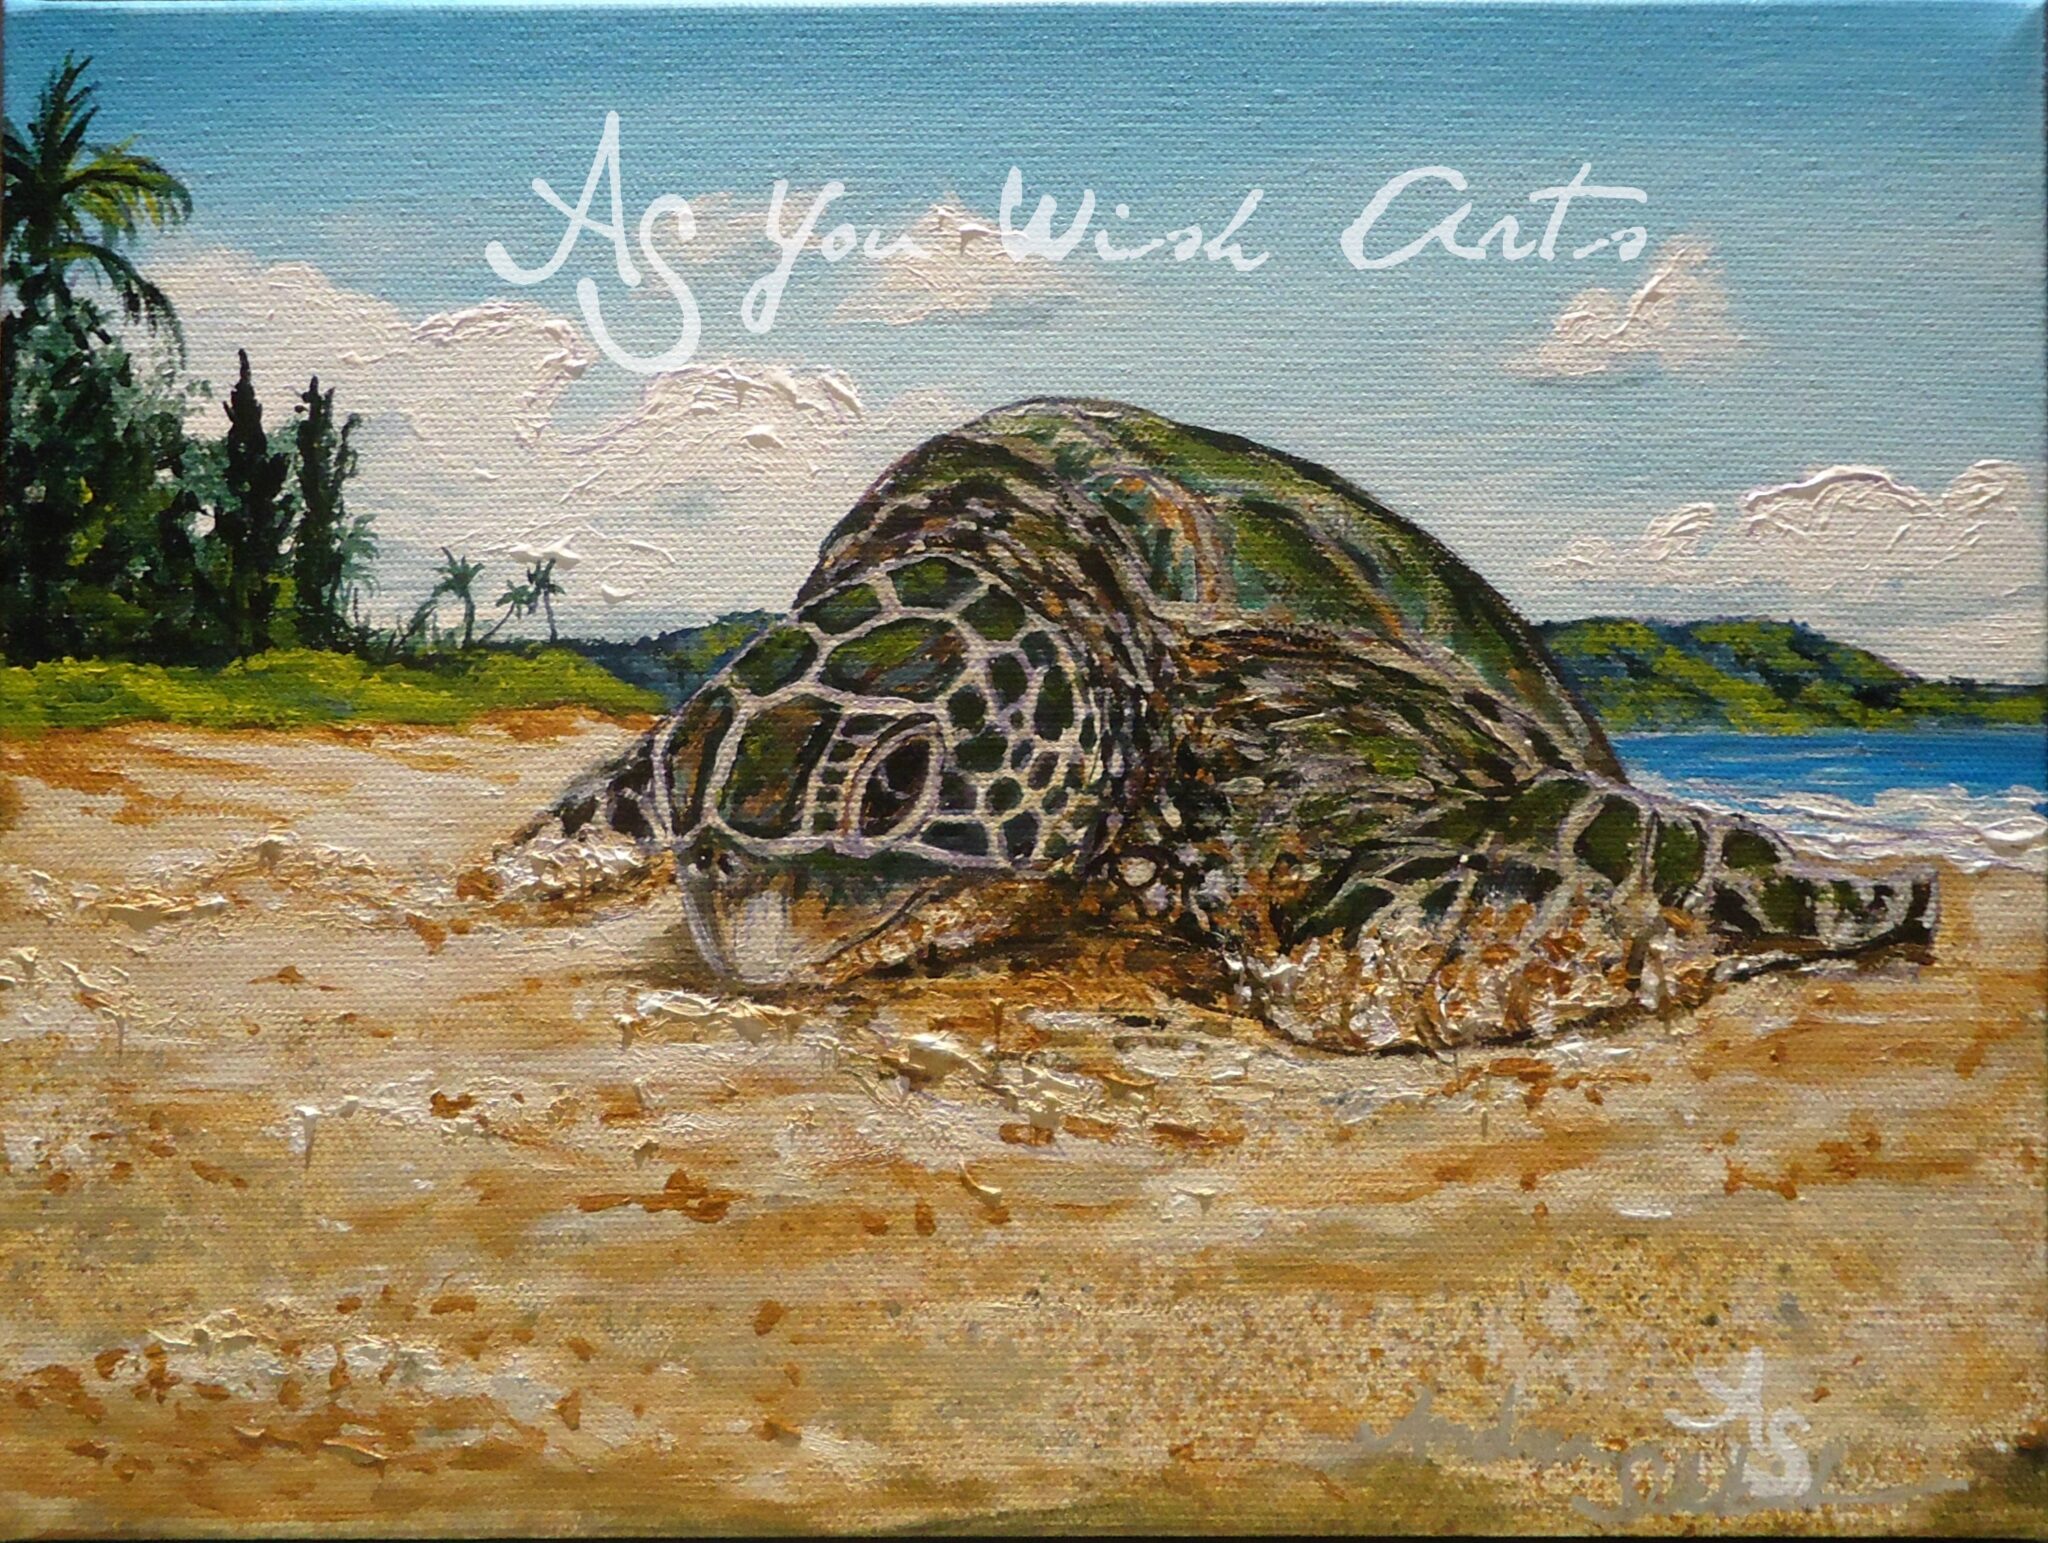 Honu winking with As you wish arts watermark